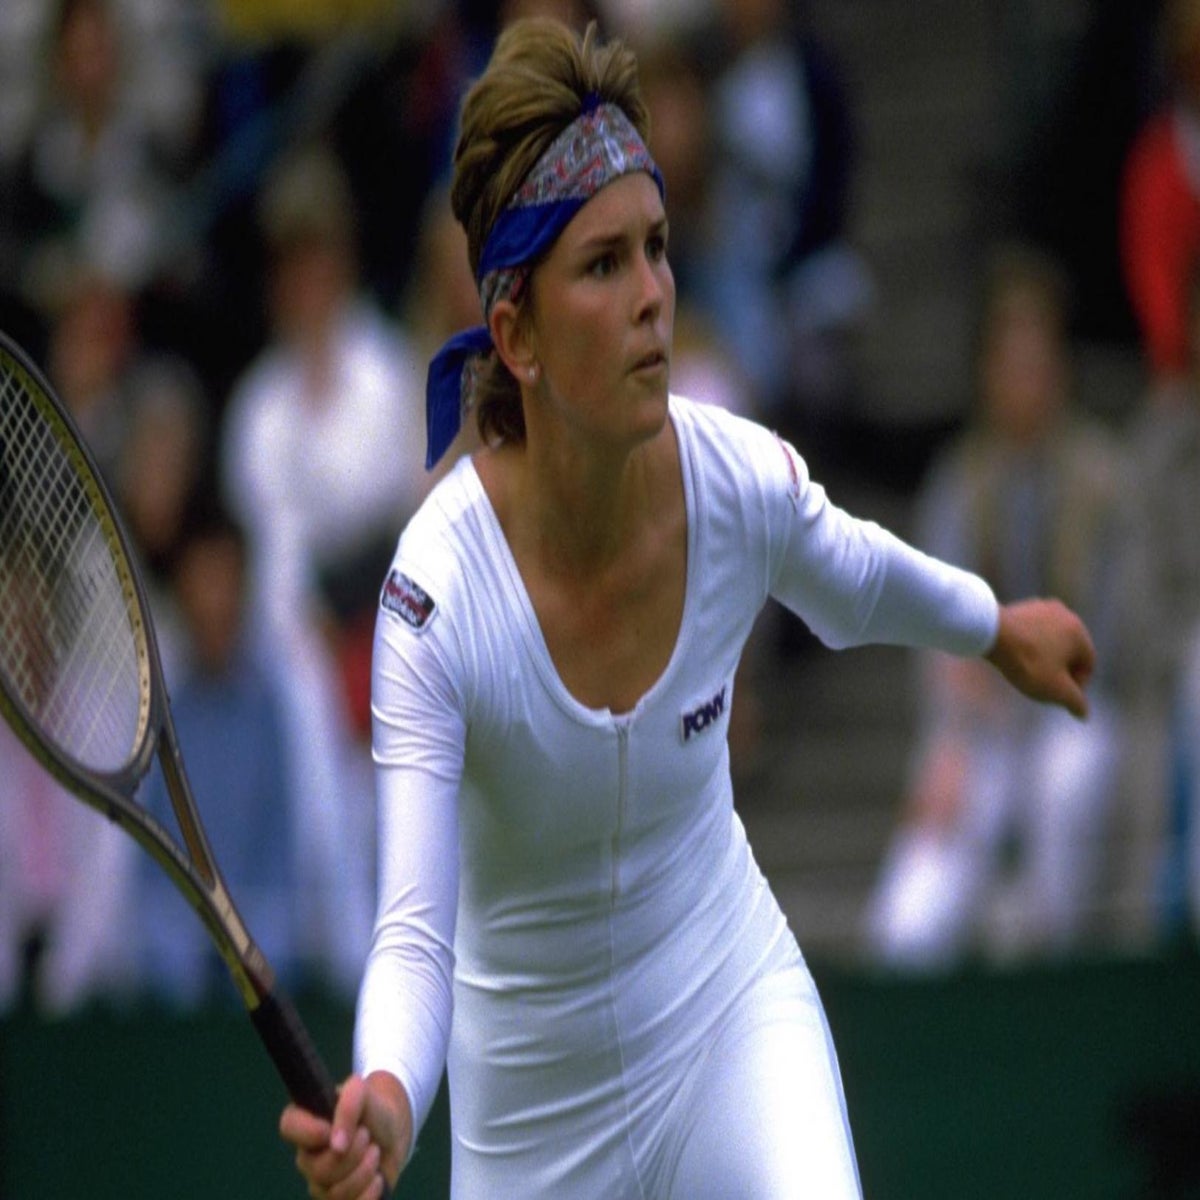 Wimbledon 2022: Most controversial outfits of all time